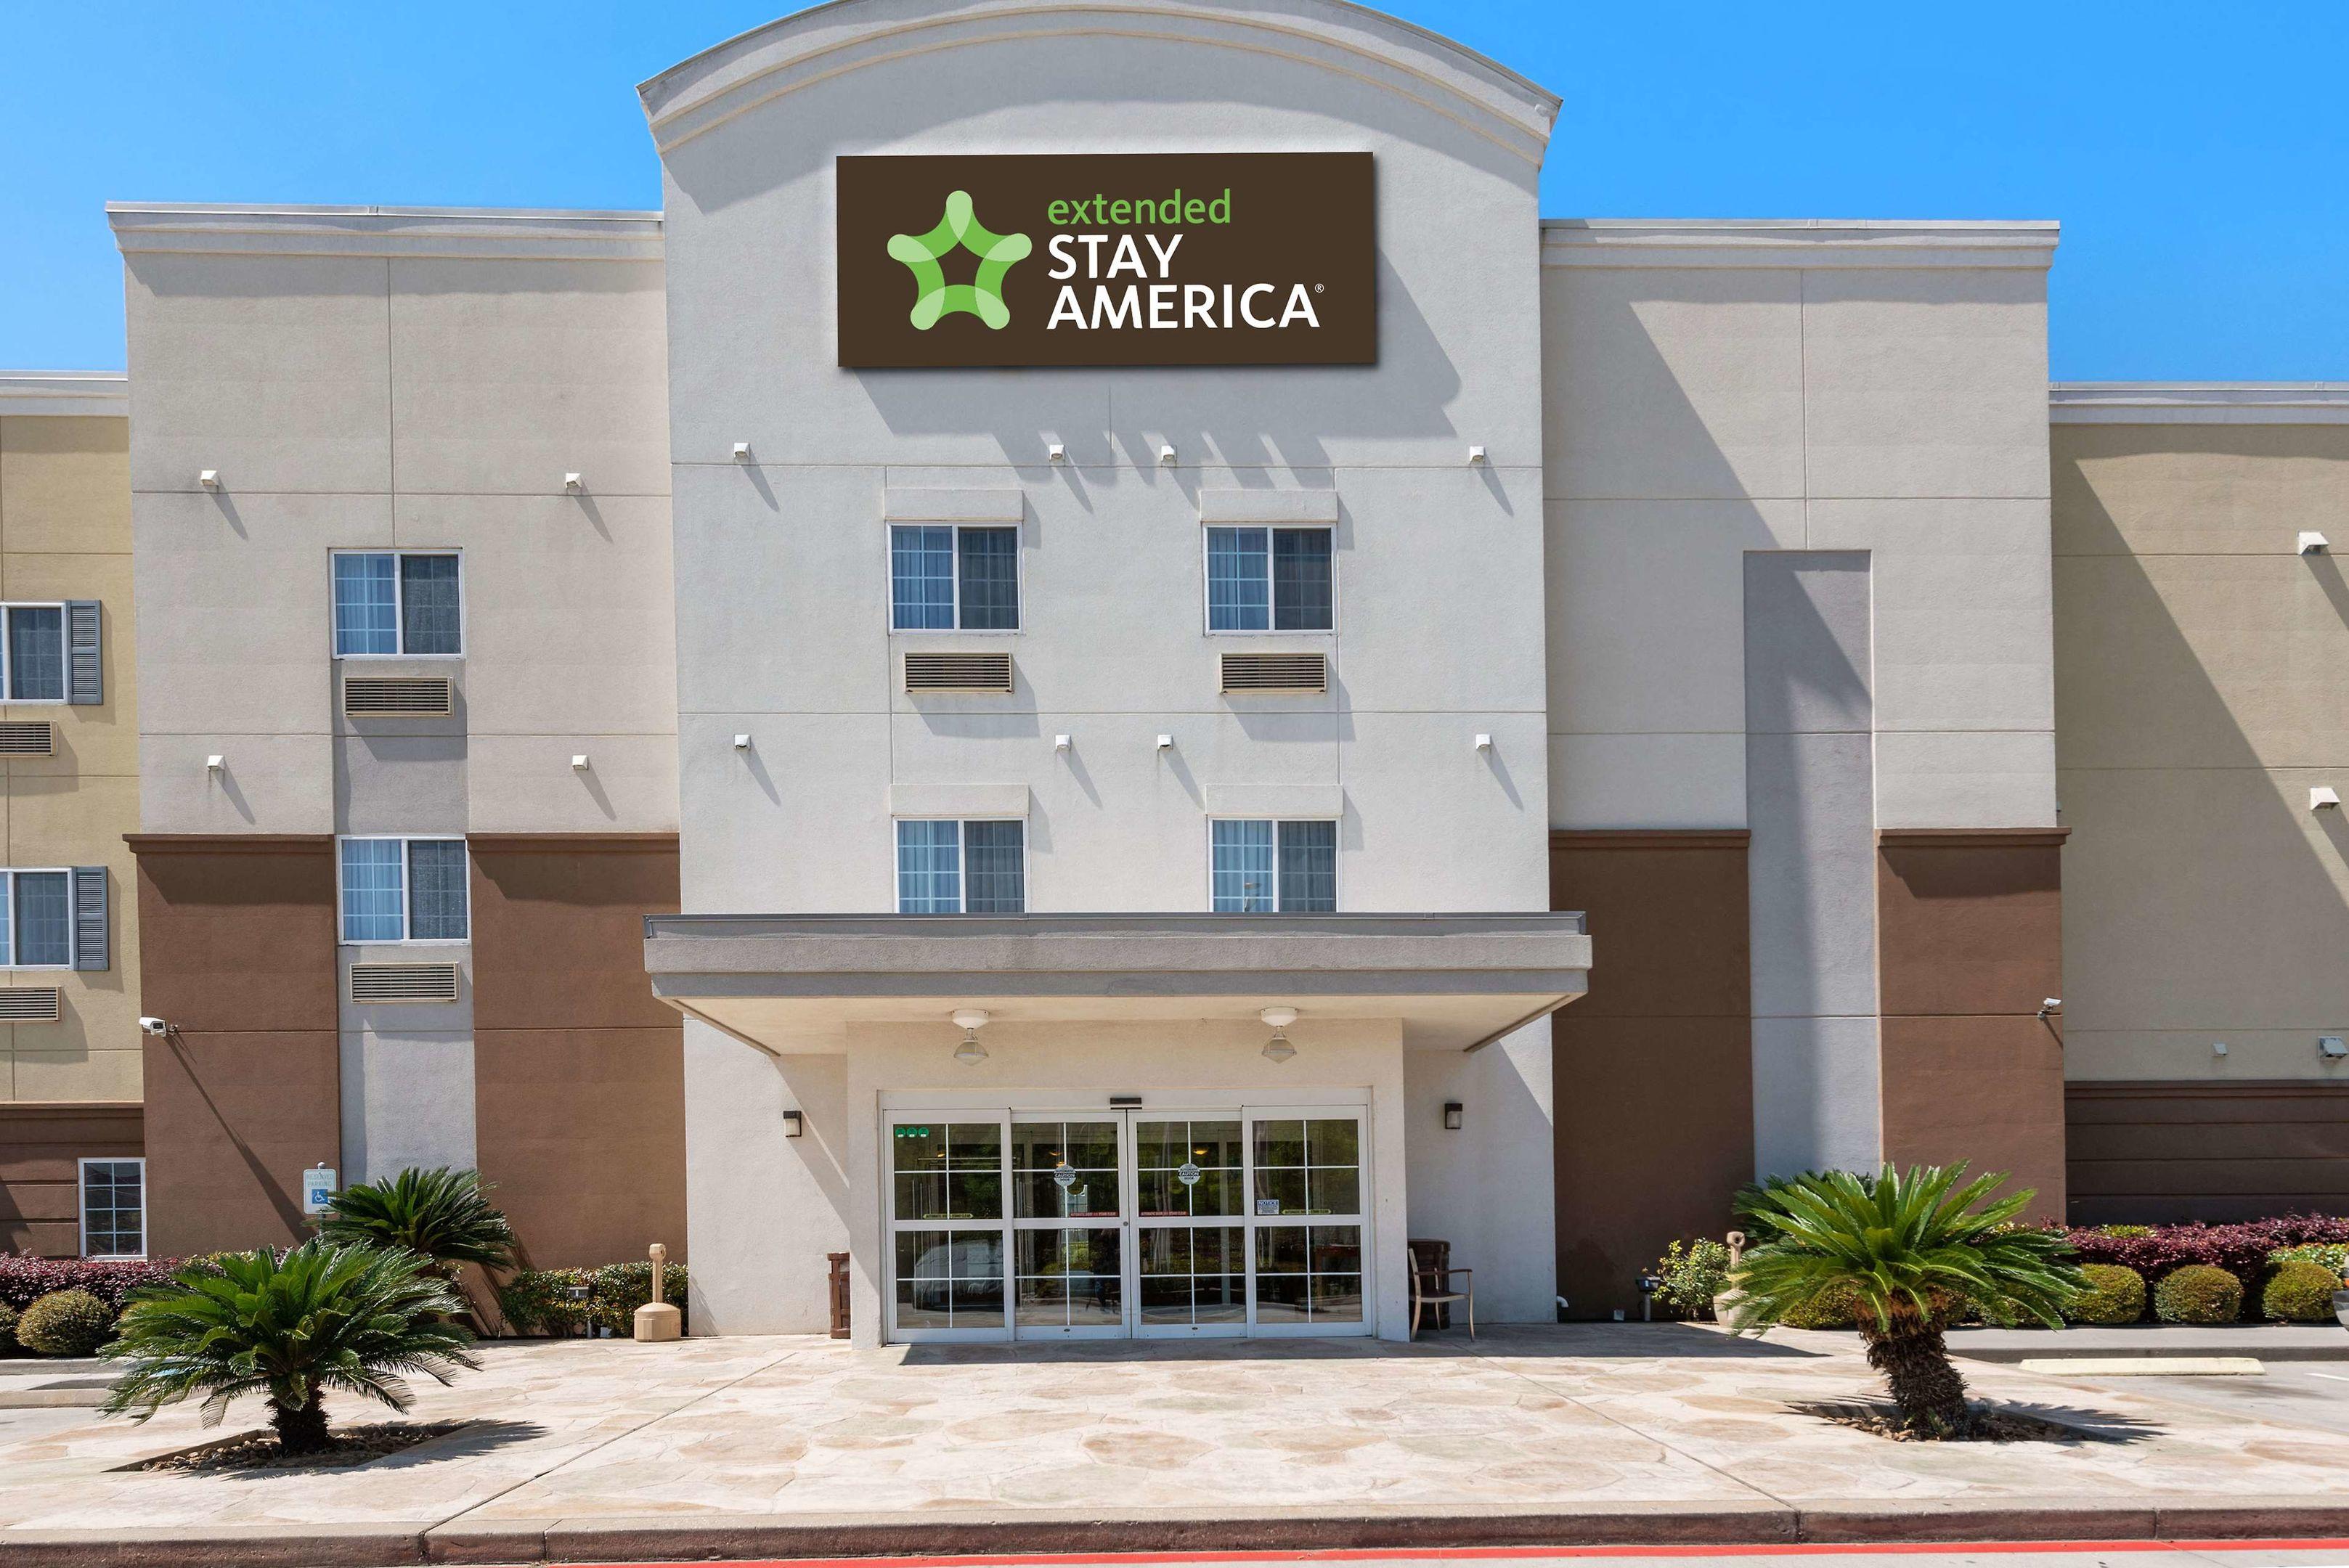 Extended Stay America Lawton - Fort Sill